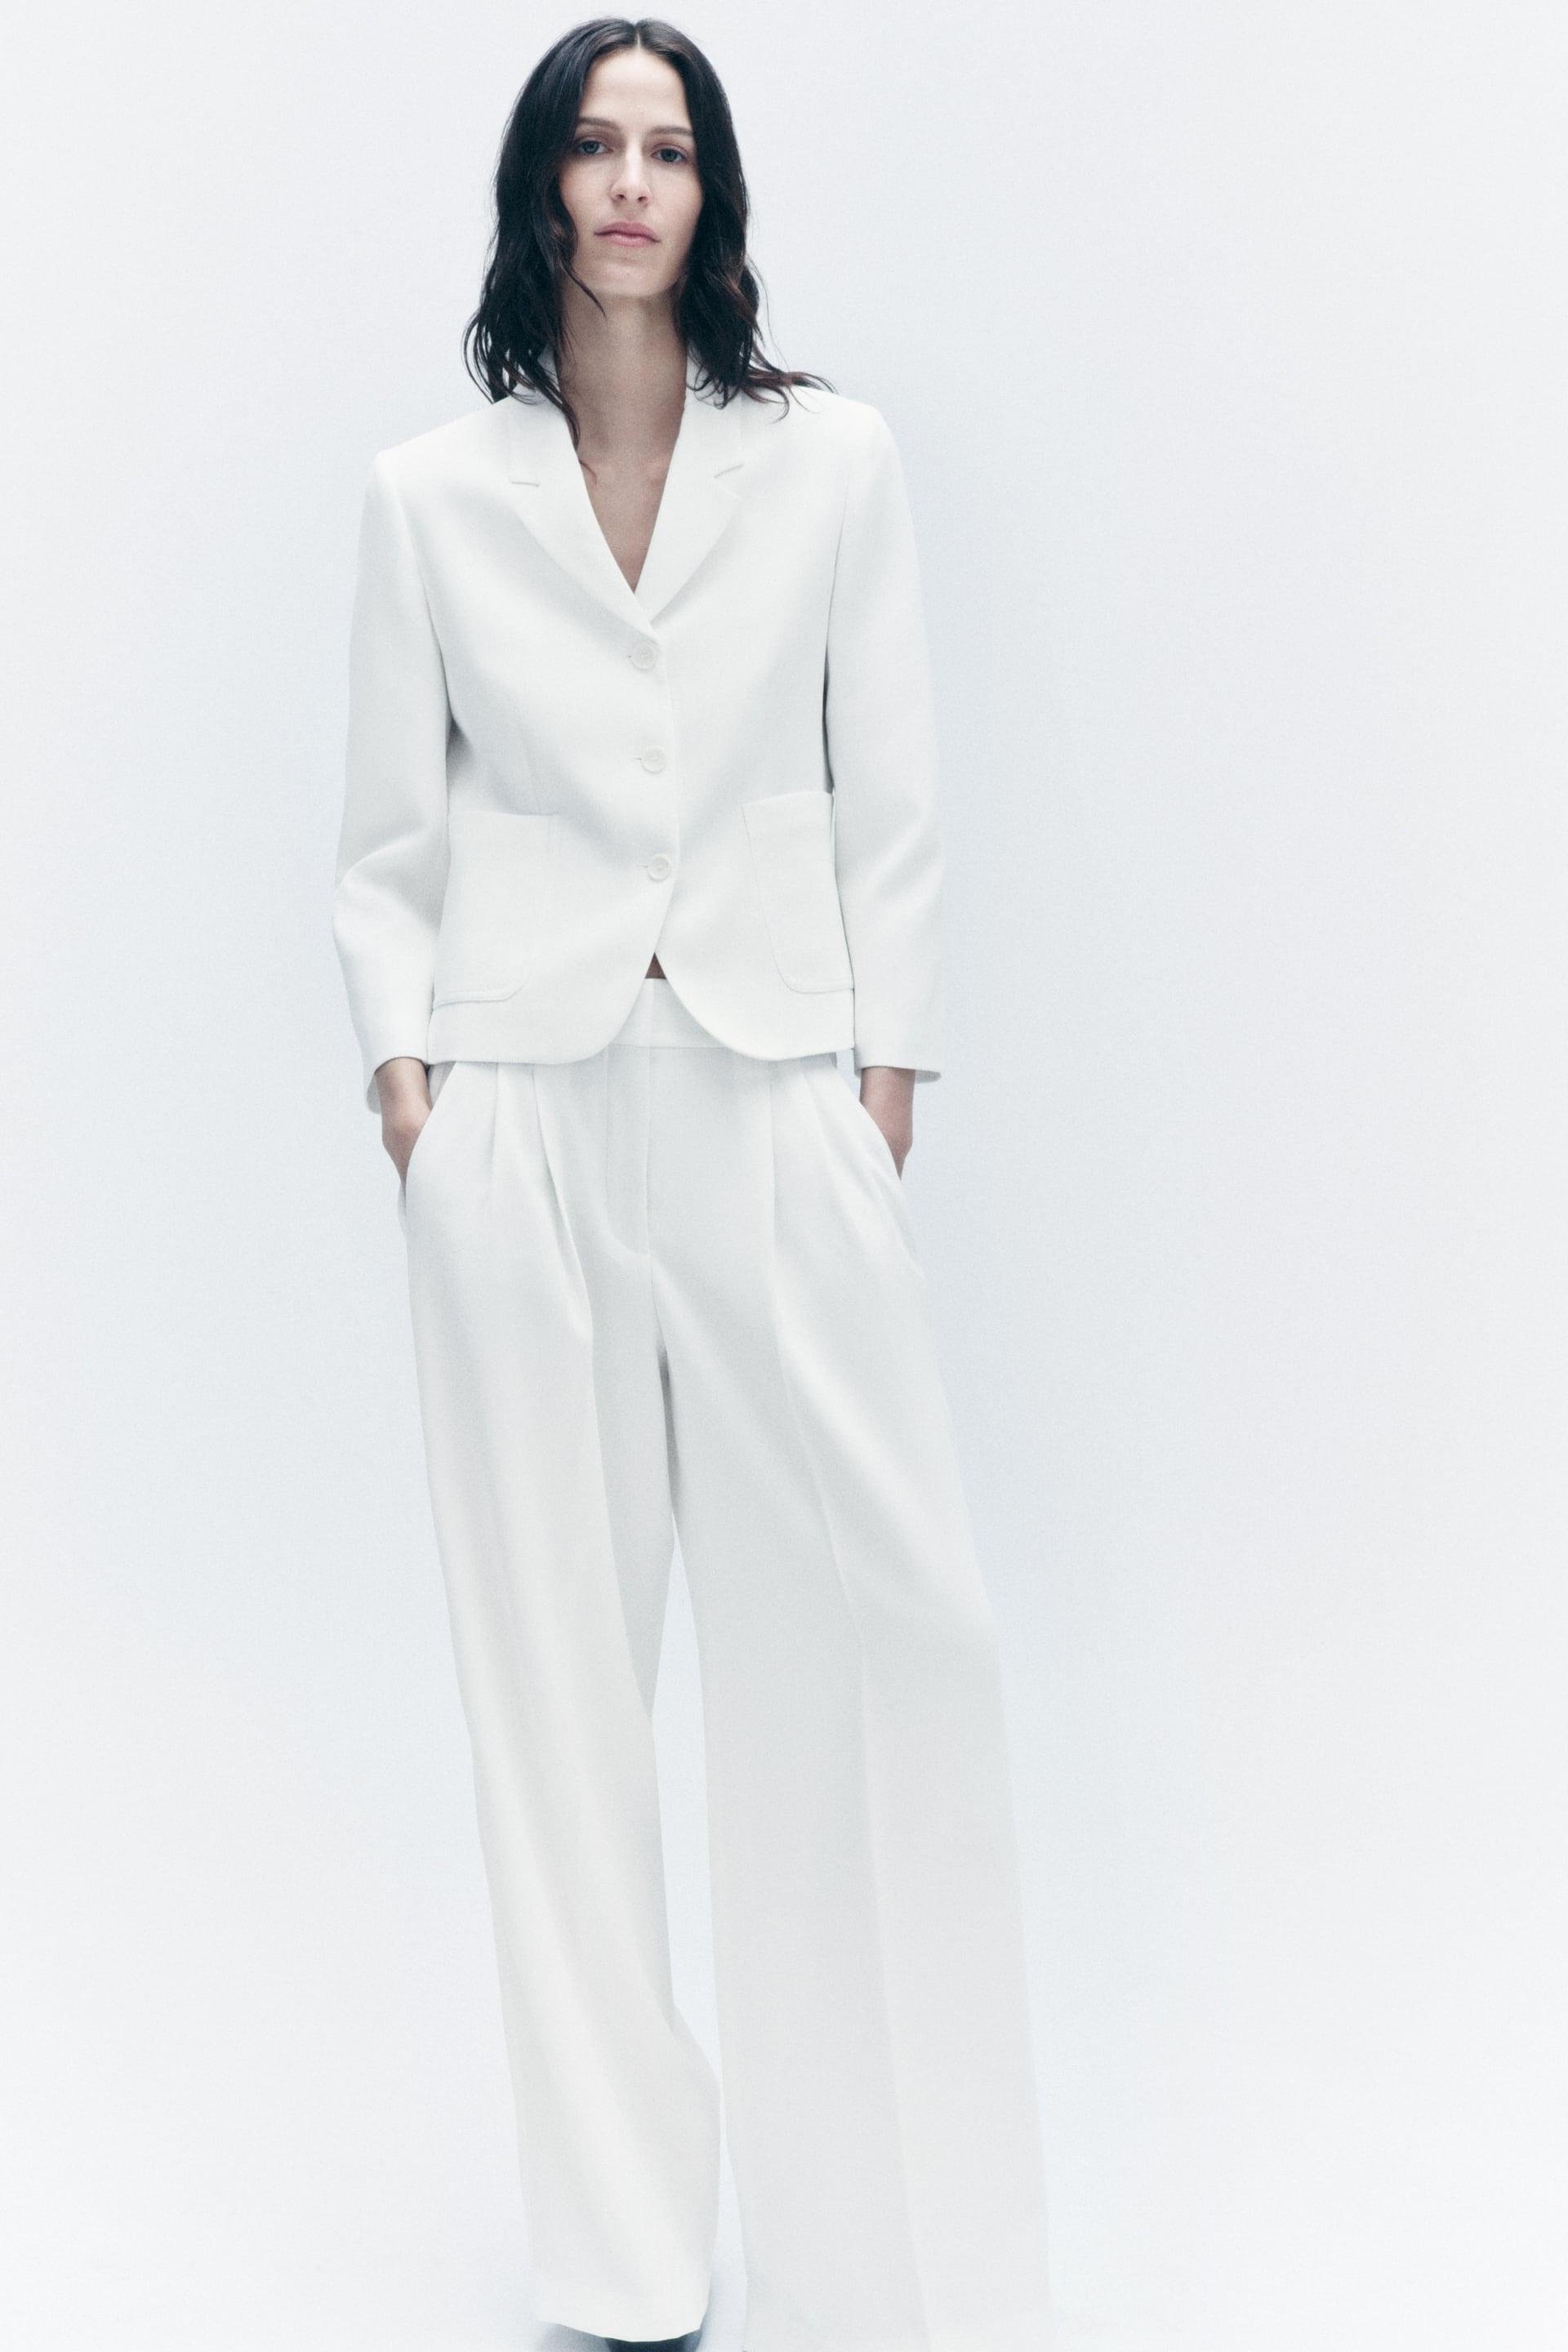 ZW COLLECTION FITTED BLAZER AND DARTED TROUSERS SUIT by ZARA